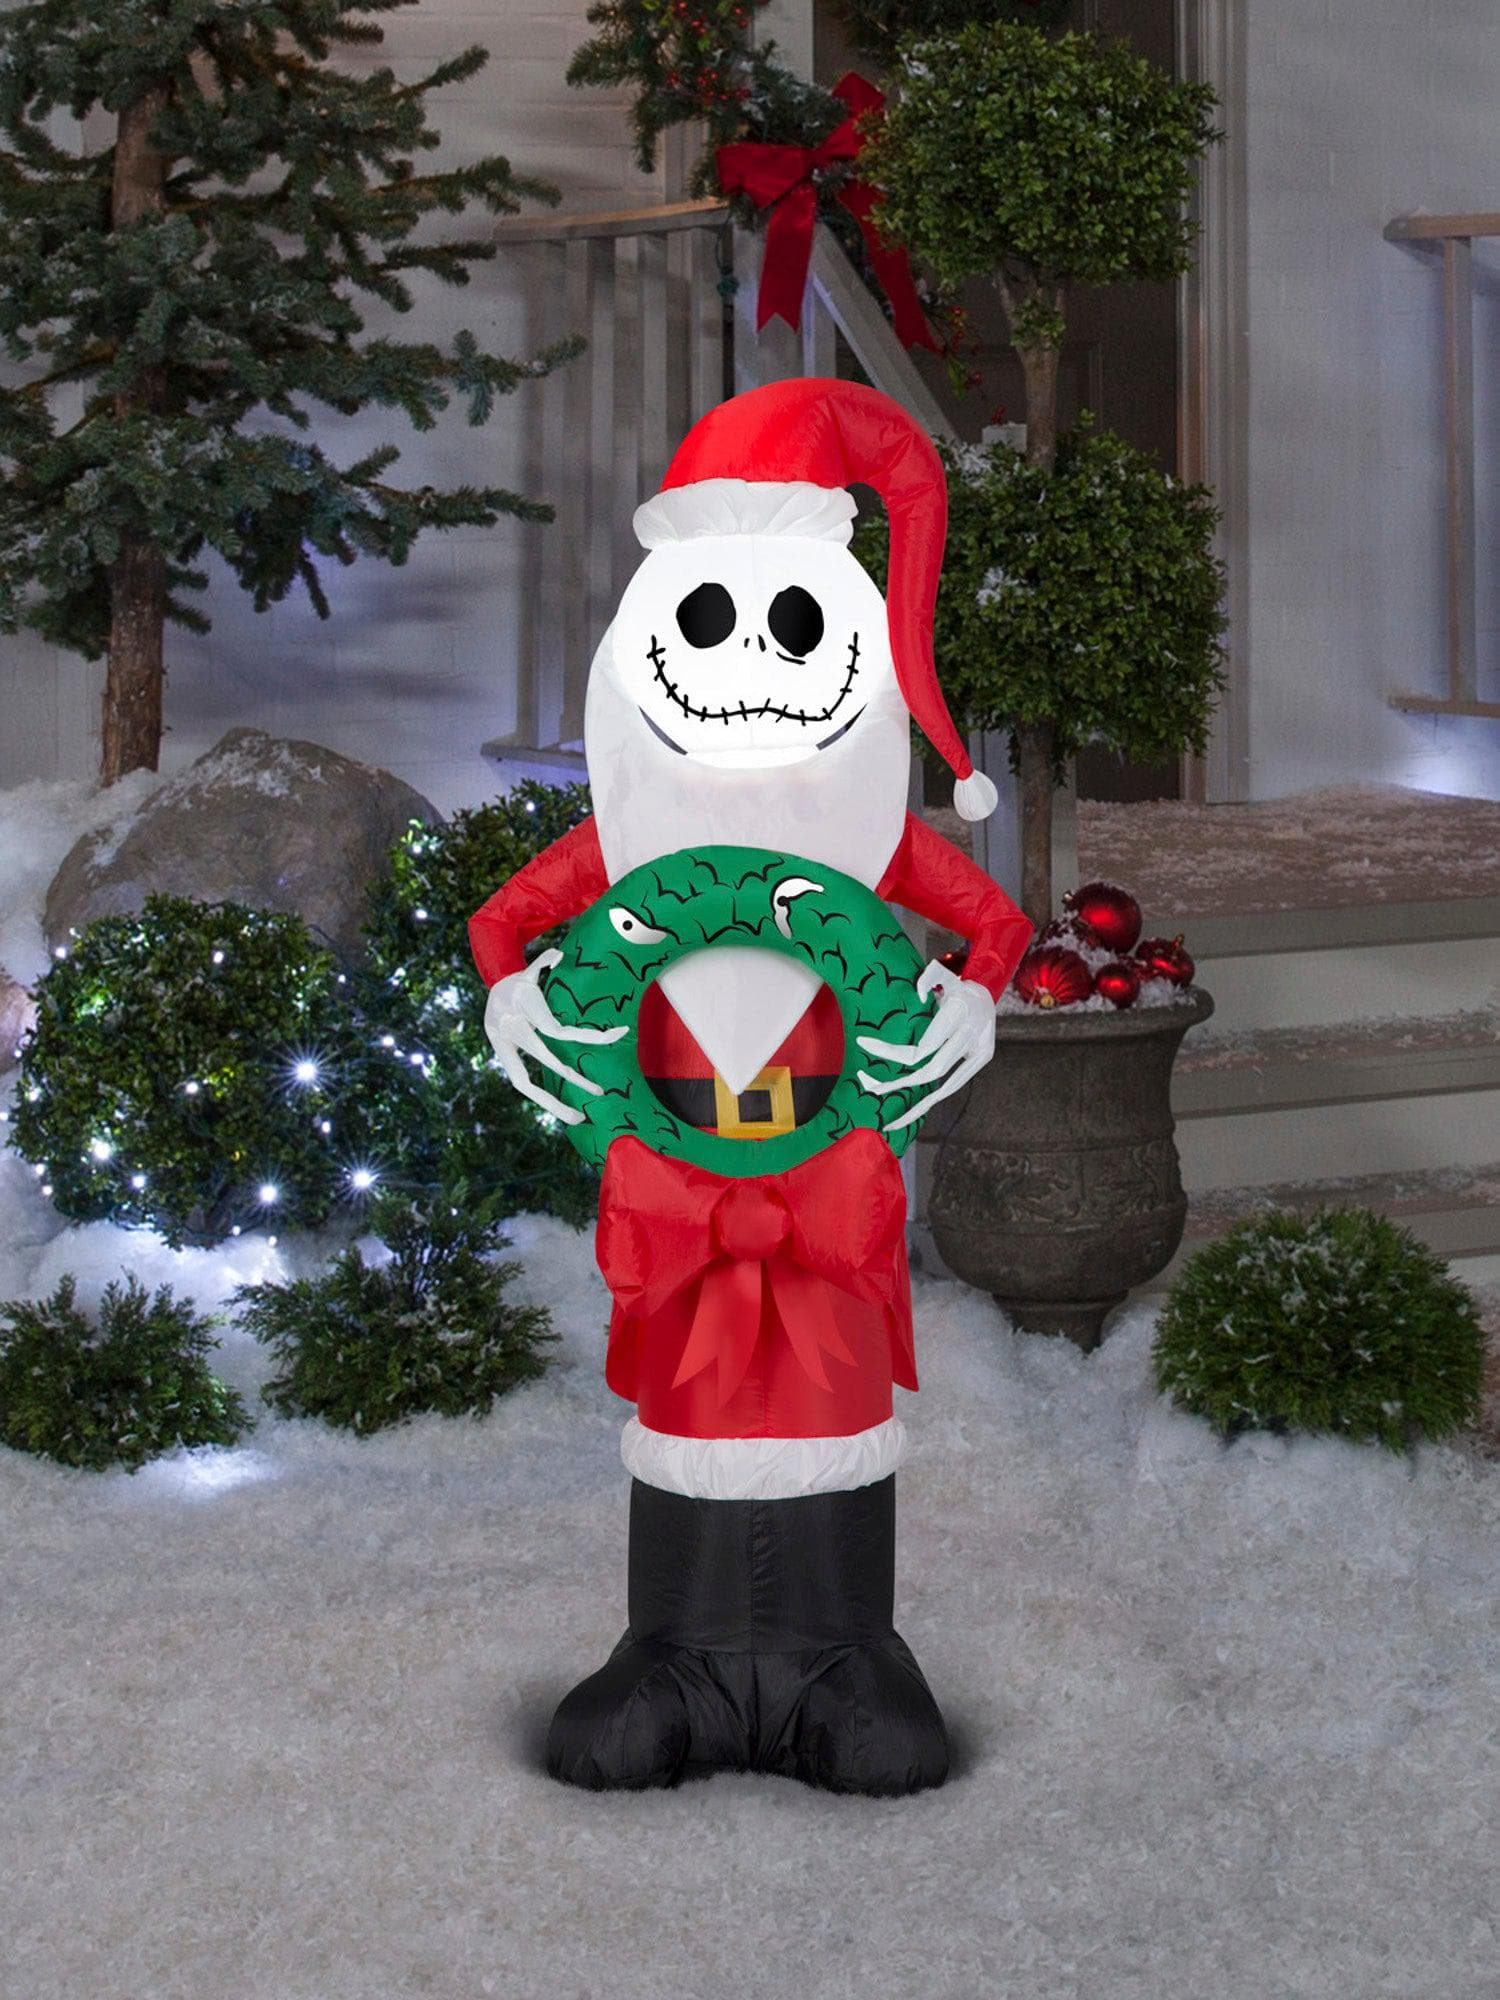 4 Foot The Nightmare Before Christmas Jack Skellington's Wreath Light Up Christmas Inflatable Lawn Decor - costumes.com